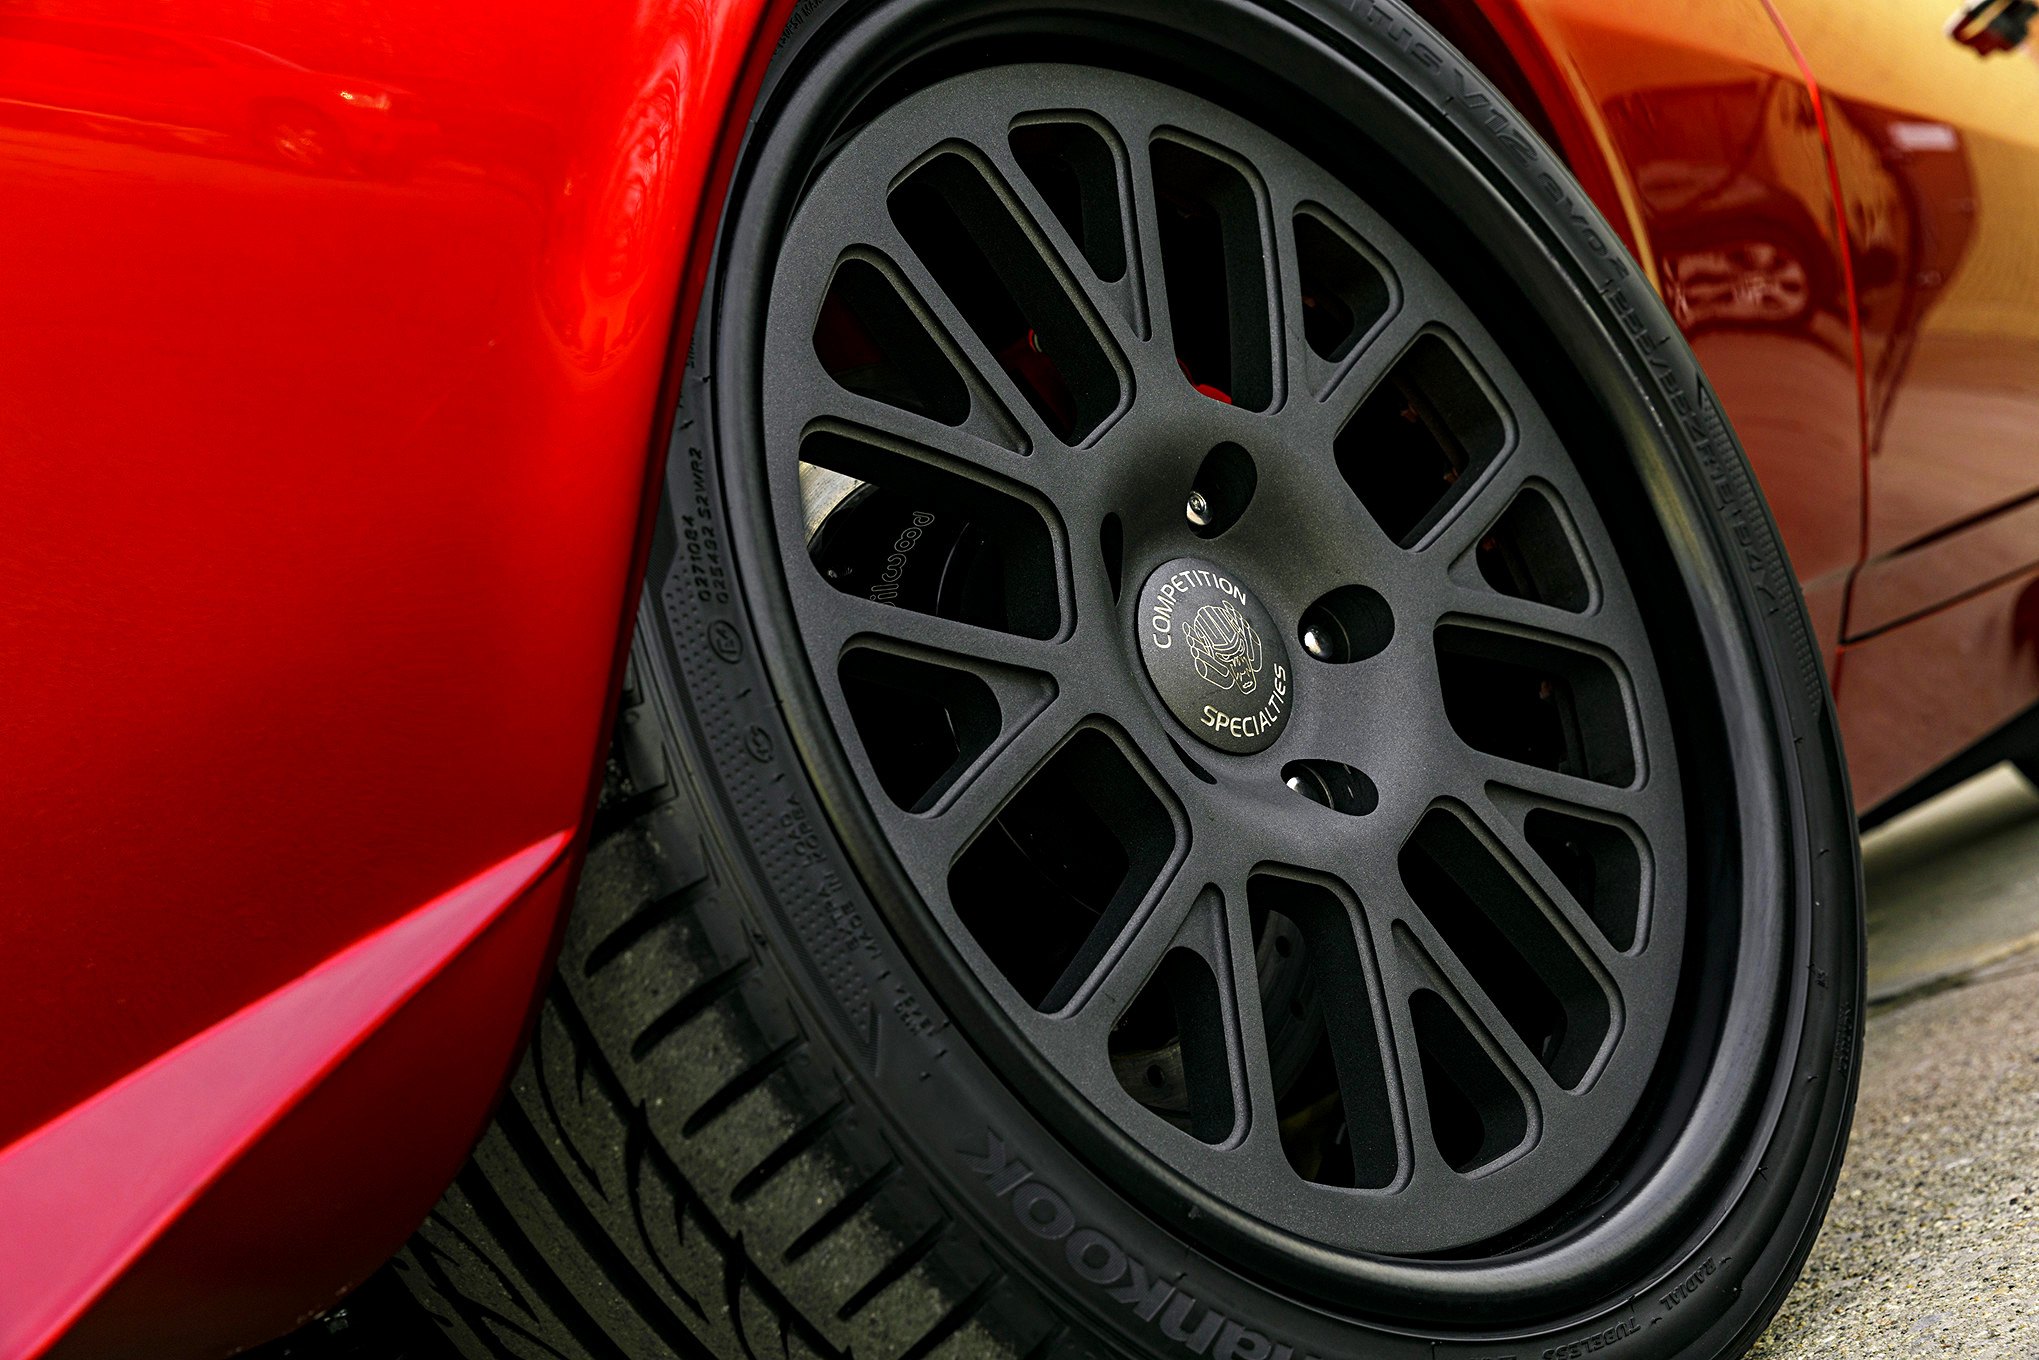 Competition Specialties Wheels on Red Chevy Camaro - Photo by Robert McGaffin